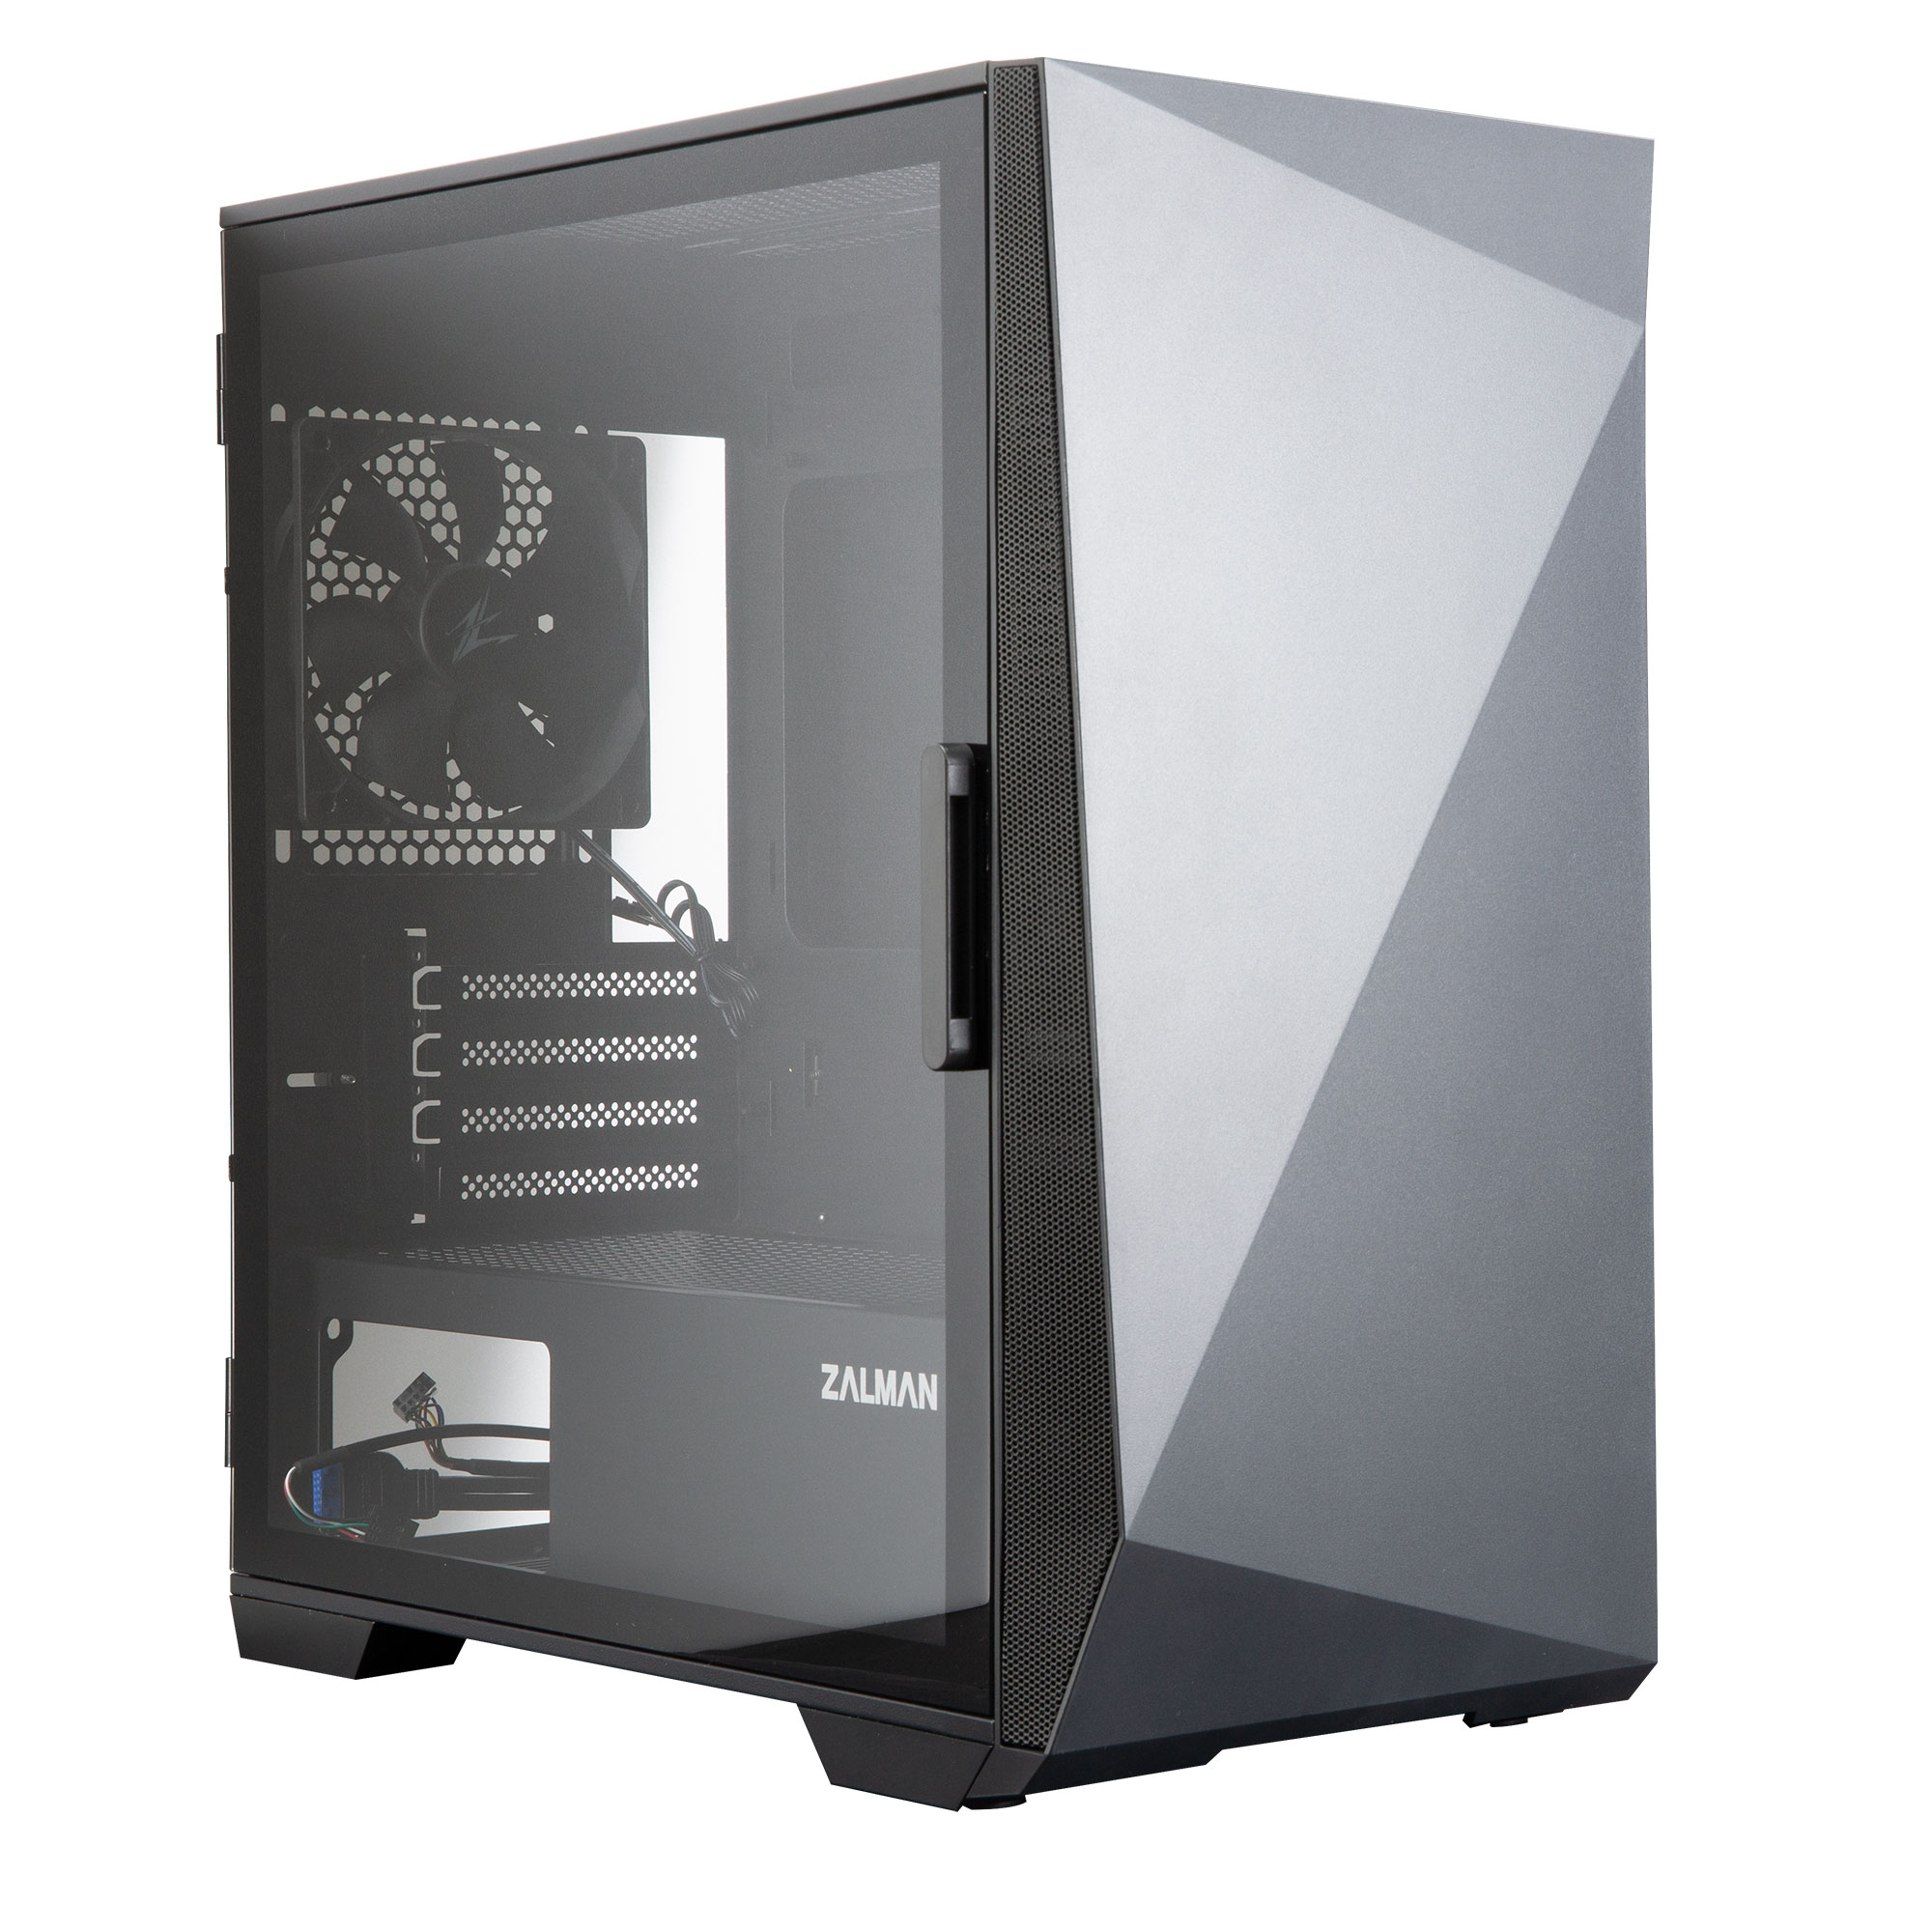 Zalman Z1 Iceberg - mATX Mid Tower PC Case/ Pre-installed fan : 2 x 120mm fan in front & 1 x 120mm fan in rear/ Support up to 240mm radiator at front/Top/ Drive bays : 2 x 2.5/3.5 & 3 x 2.5/ Tempered glass on left side/ Dimension : 360(D) x 210(W) x